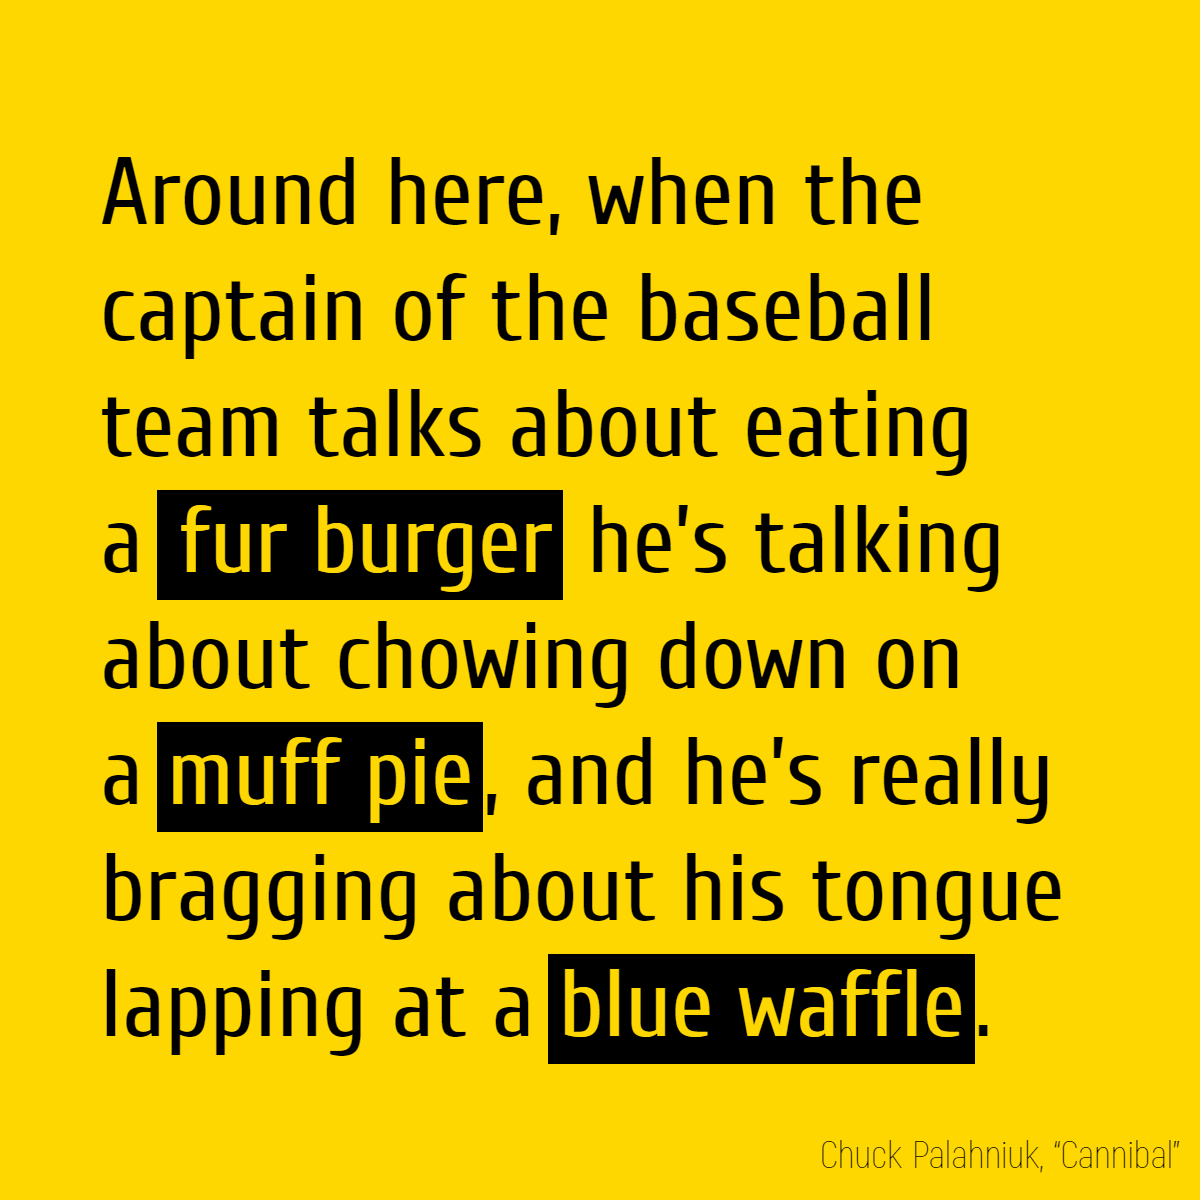 Around here, when the captain of the baseball team talks about eating a fur burger he’s talking about chowing down on a muff pie, and he’s really bragging about his tongue lapping at a blue waffle.